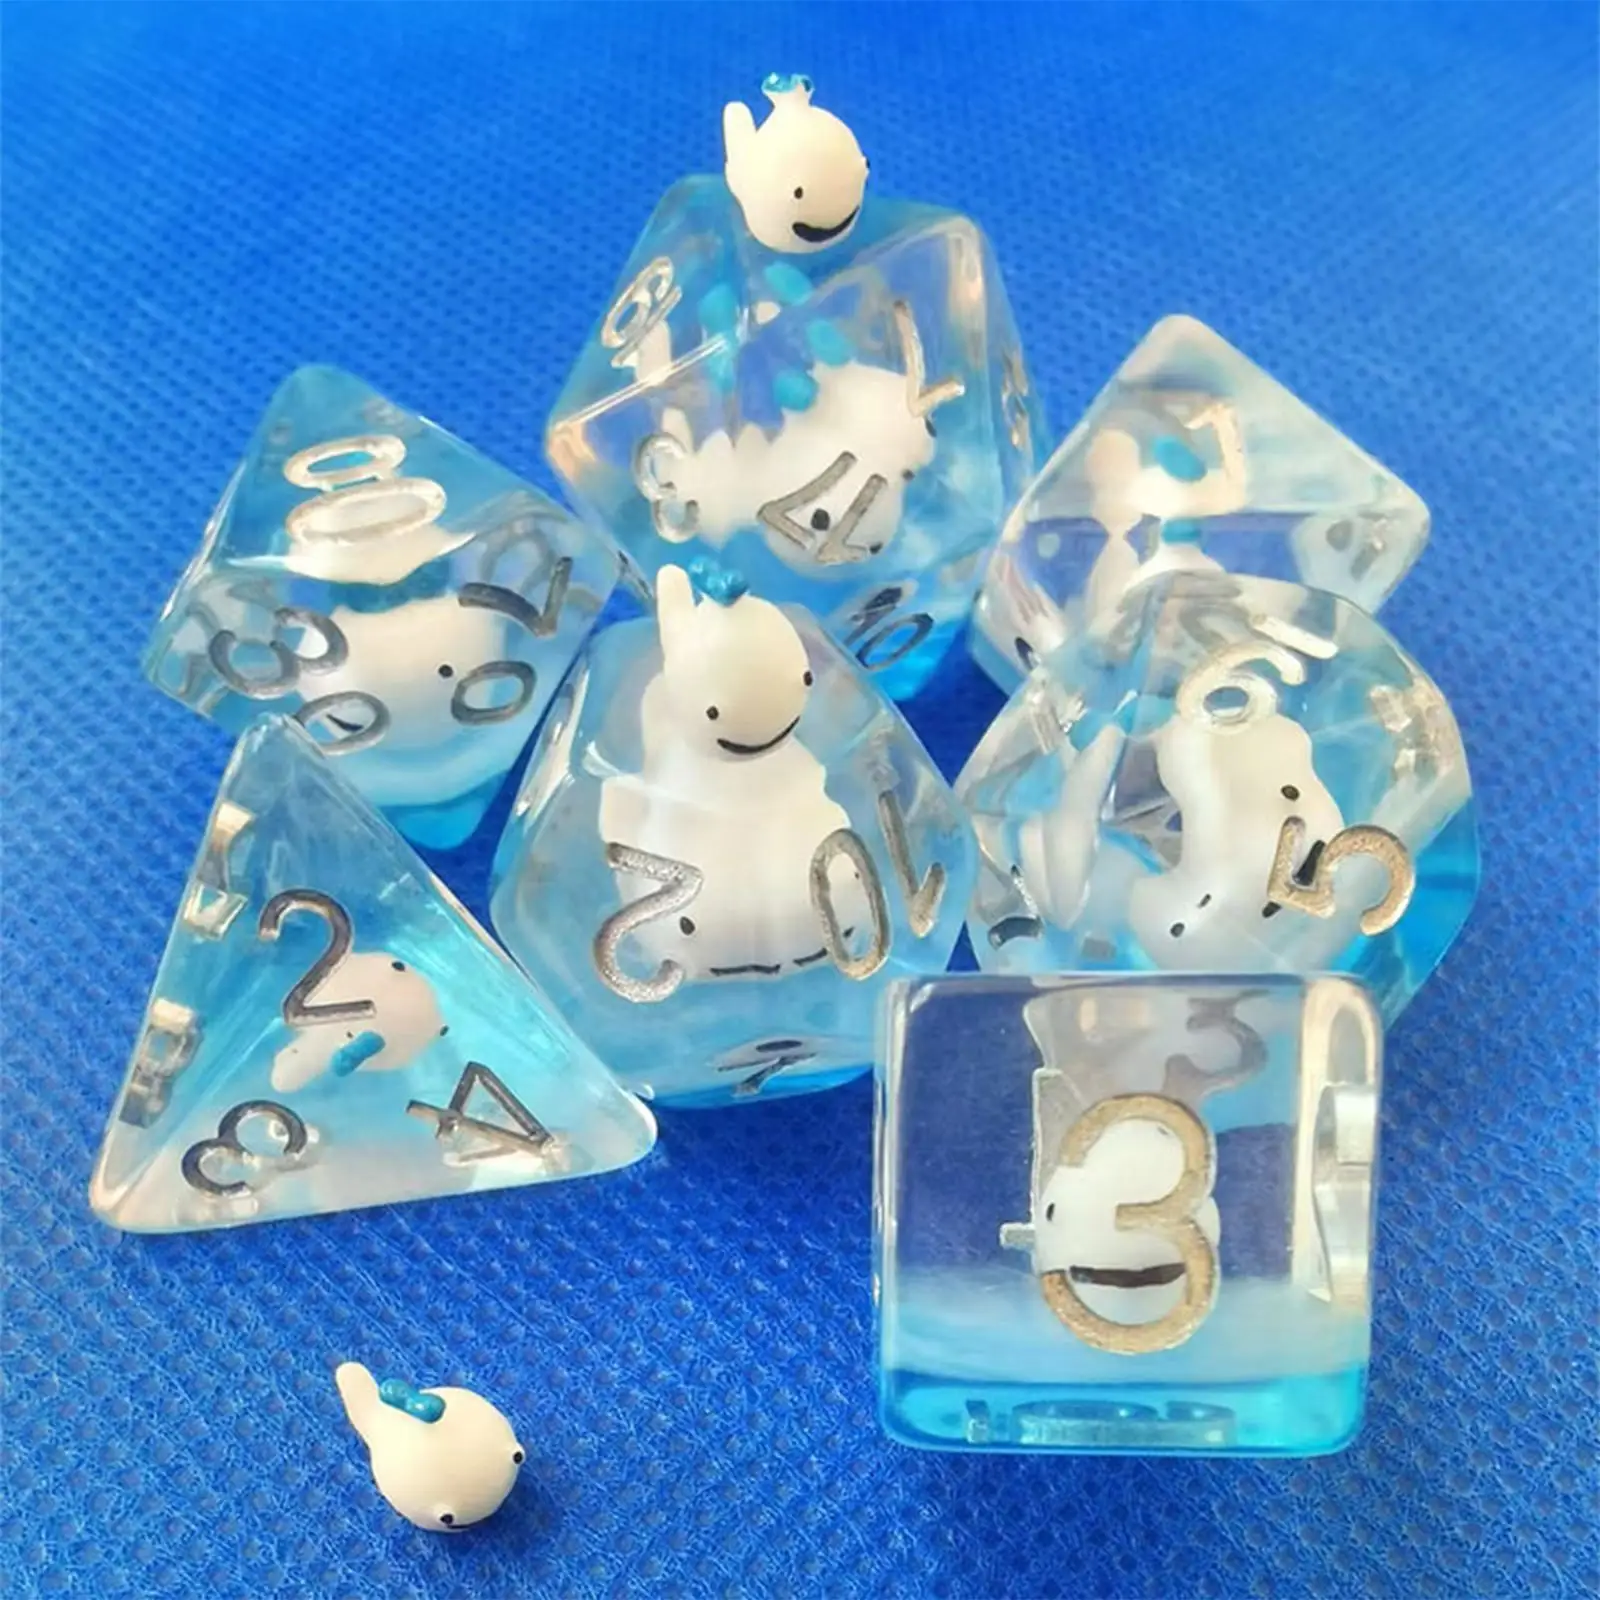 7 Pieces Polyhedral dices Built in Dolphin for Drinking Prop Entertainment